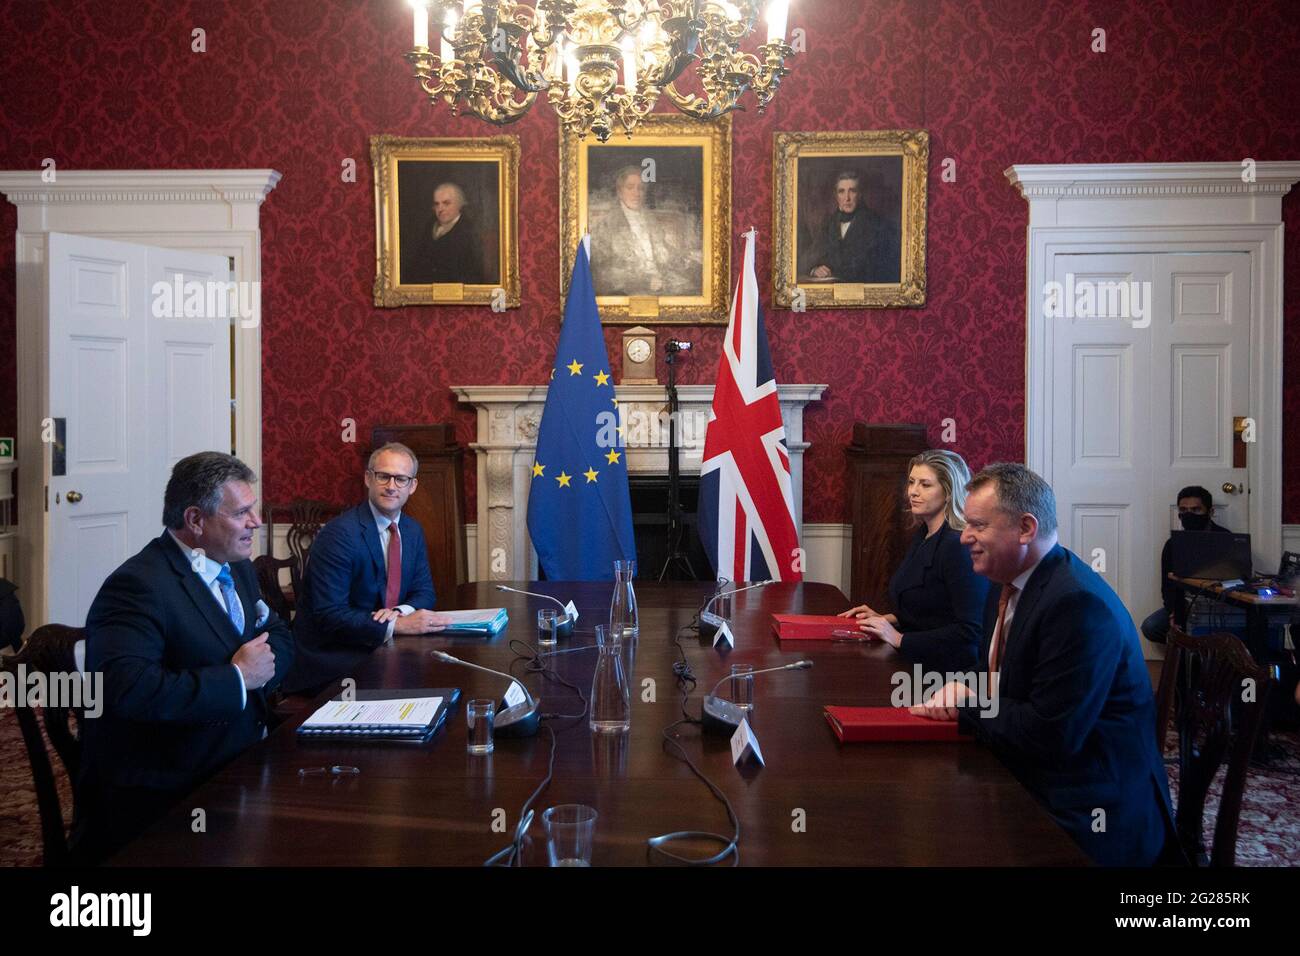 Brexit minister Lord Frost, flanked by Paymaster General Penny Mordaunt, sitting opposite European Commission vice president Maros Sefcovic, who is flanked by Principal Adviser, Service for the EU-UK Agreements (UKS) Richard Szostak, as he chairs the first EU-UK partnership council at Admiralty House in London. Picture date: Wednesday June 9, 2021. Stock Photo